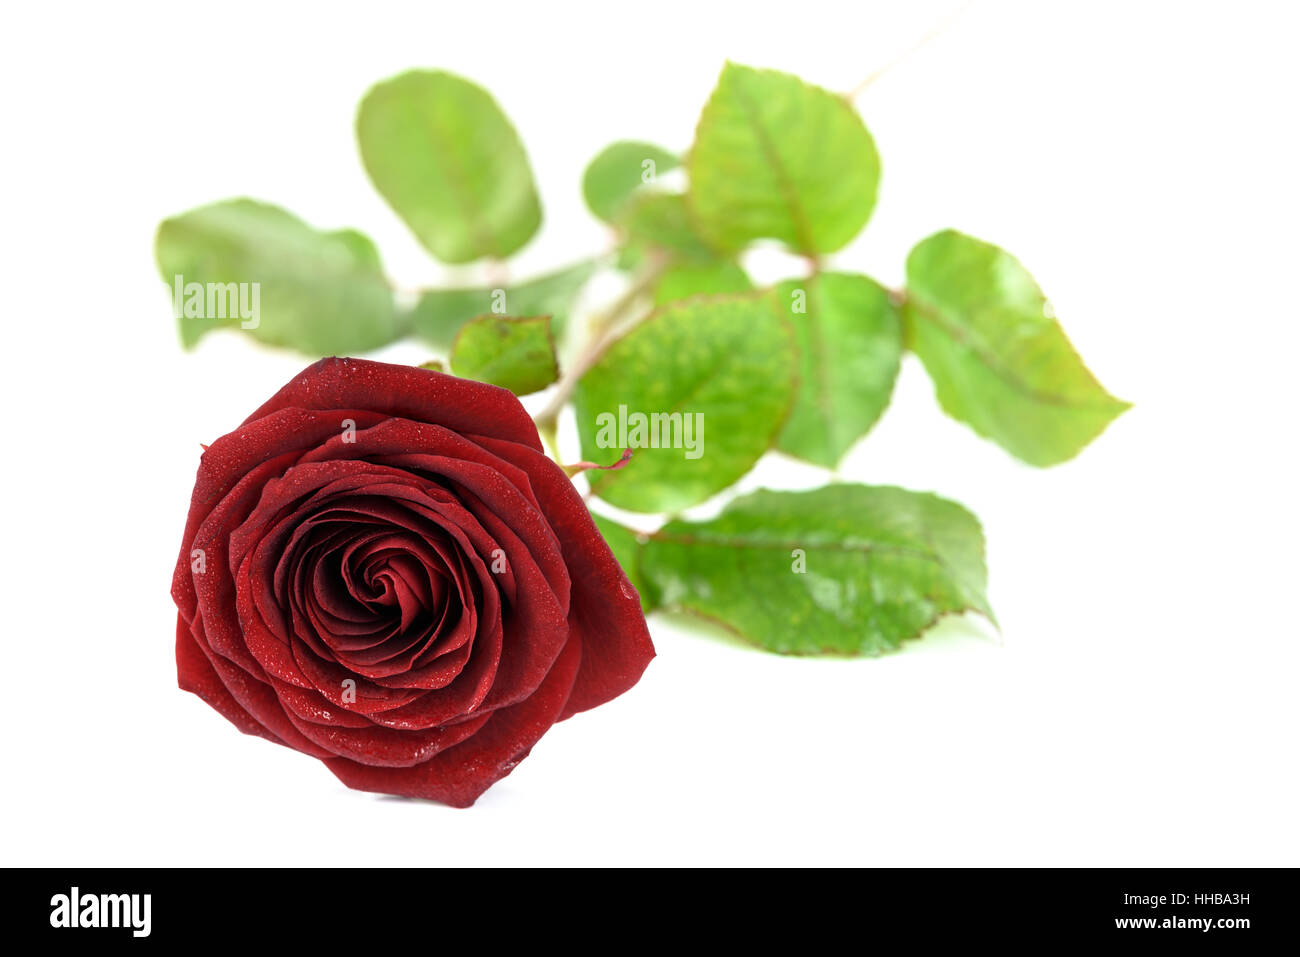 Blooming red rose in drops of dew and isolated on a white background. Stock Photo